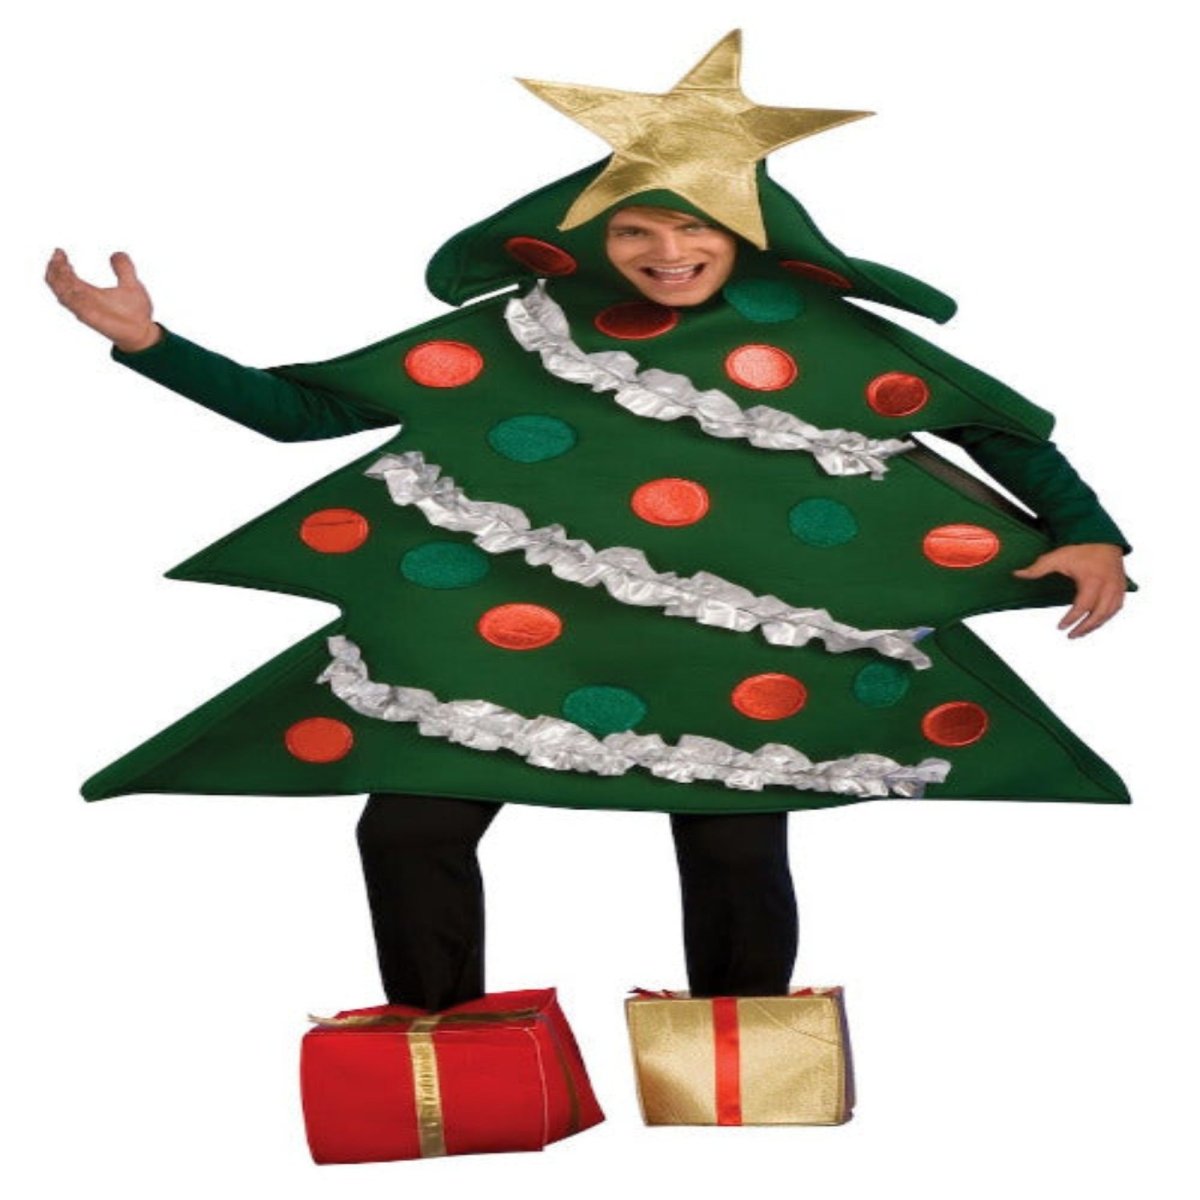 Adult Christmas Tree Costume With Present Shoe Covers - worldclasscostumes